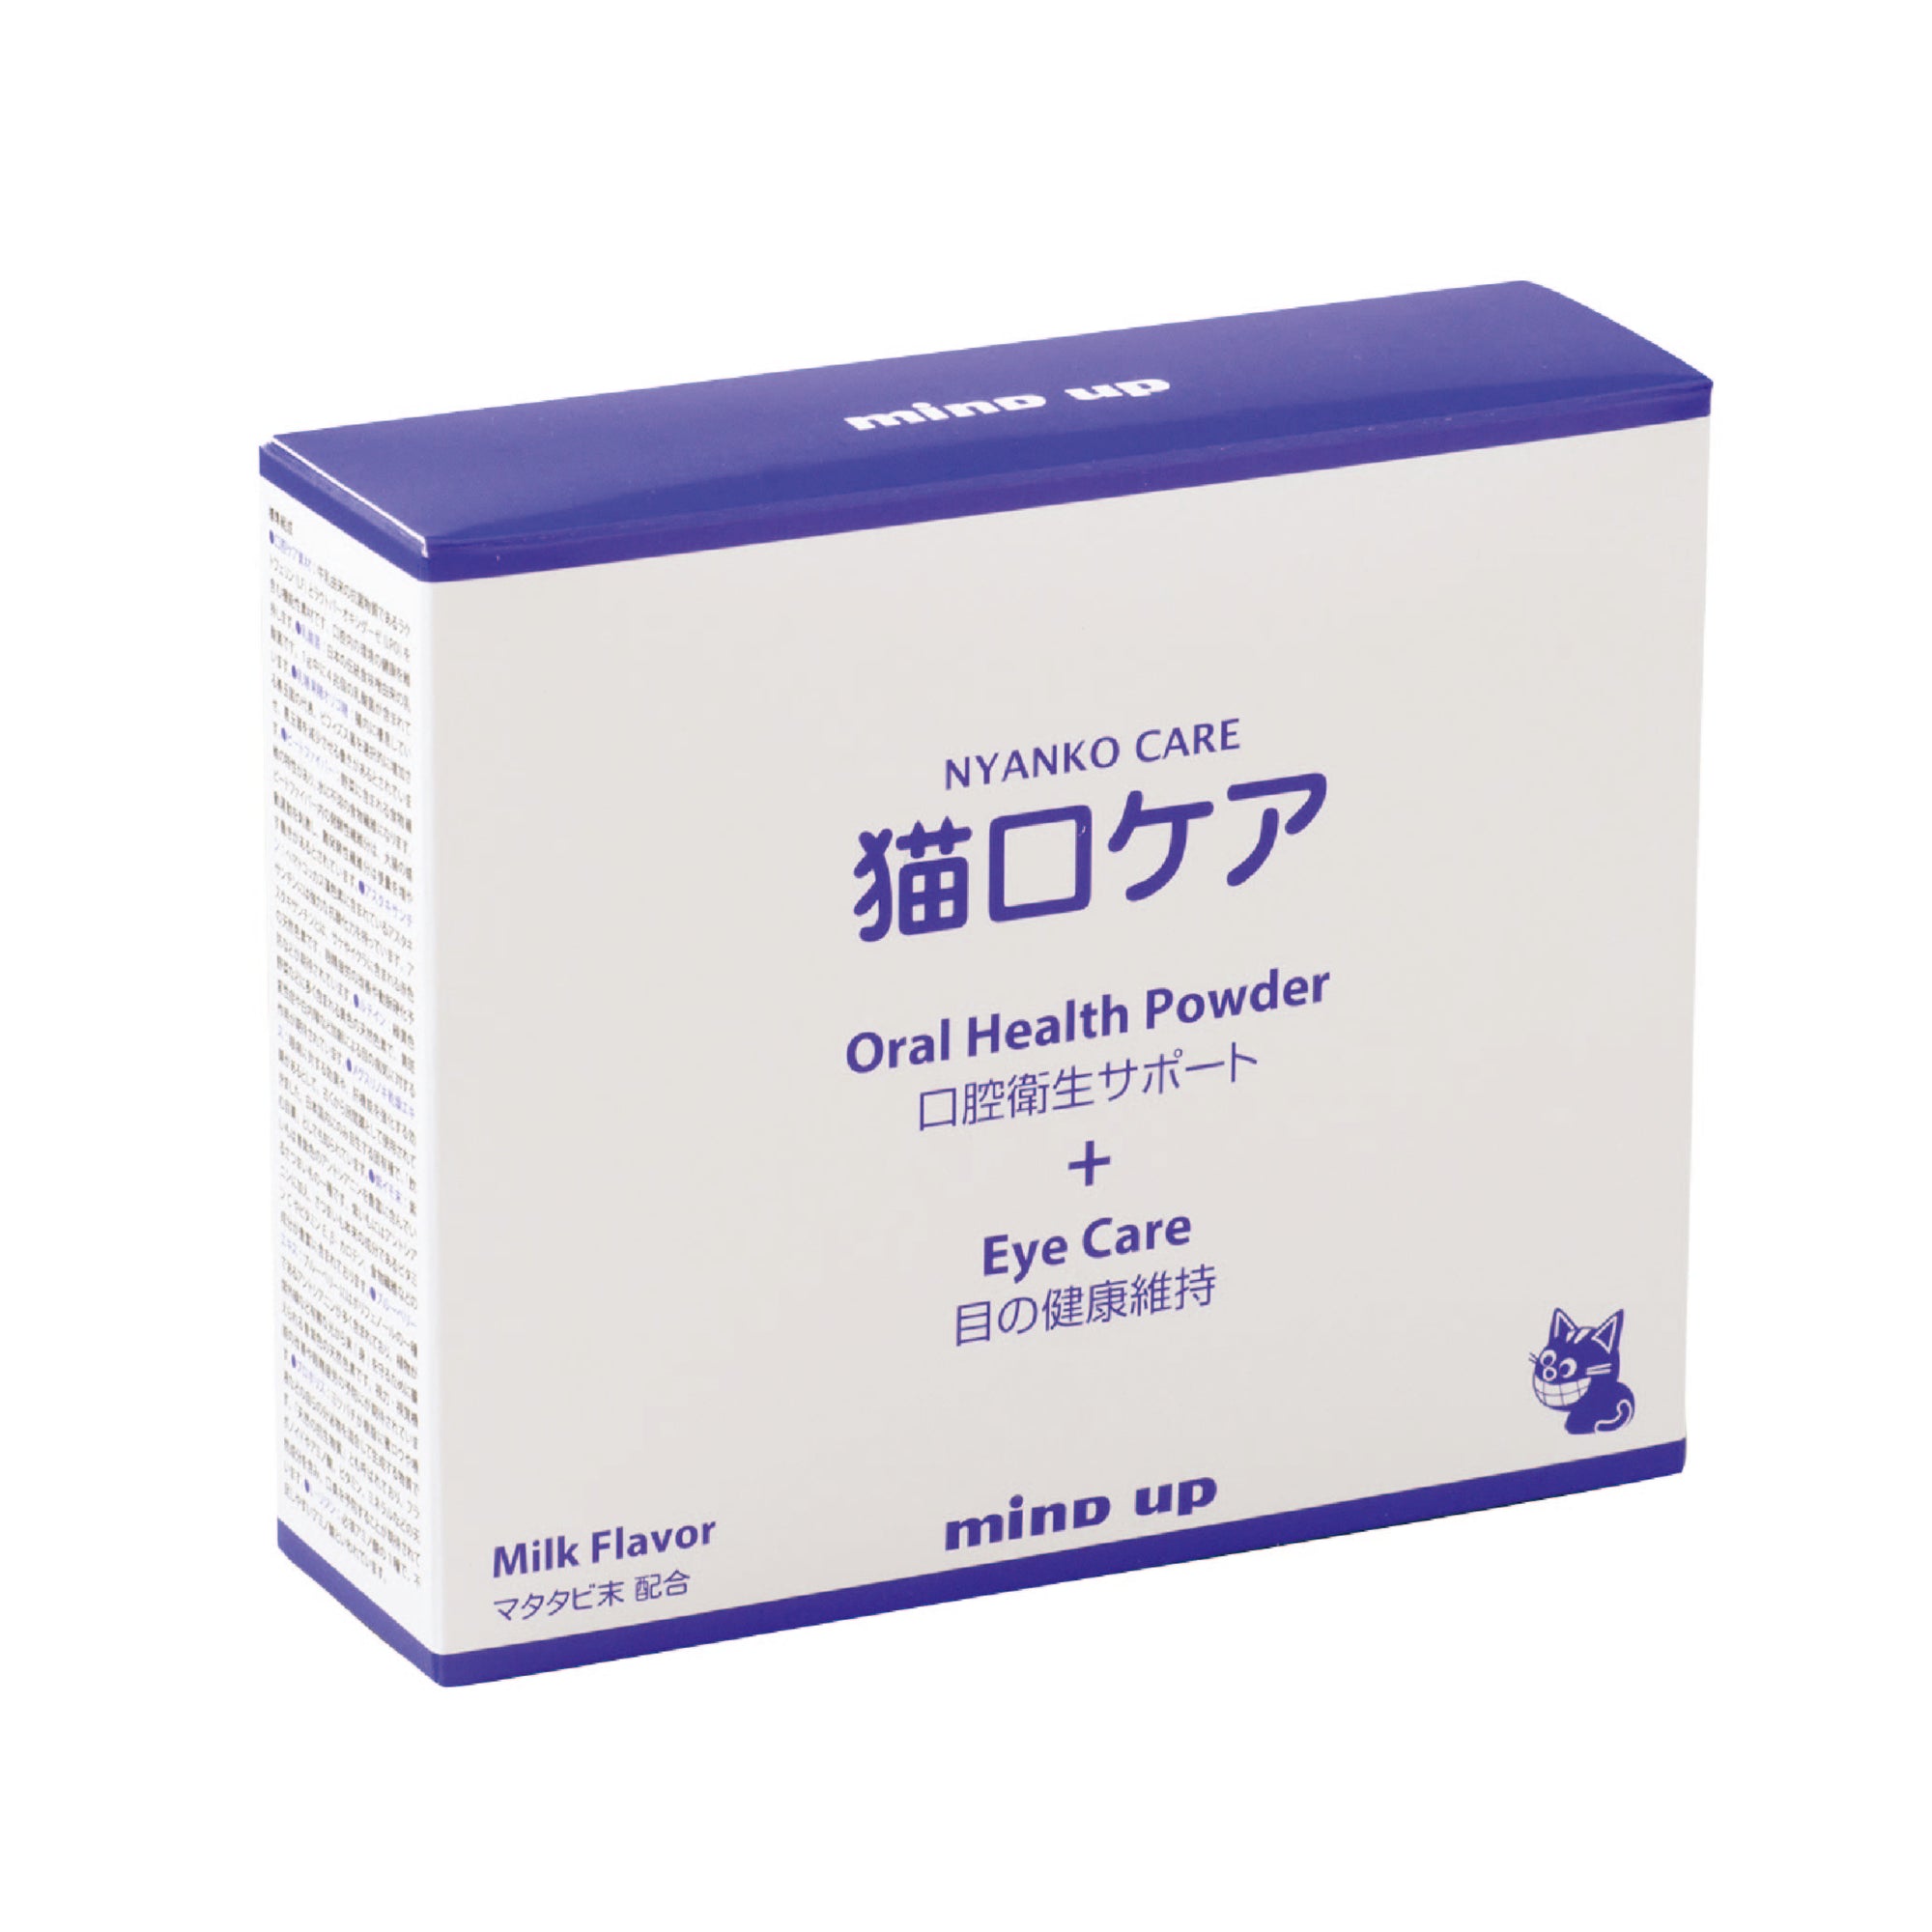 NYANKO CARE Oral Health Powder + Eye Care Support